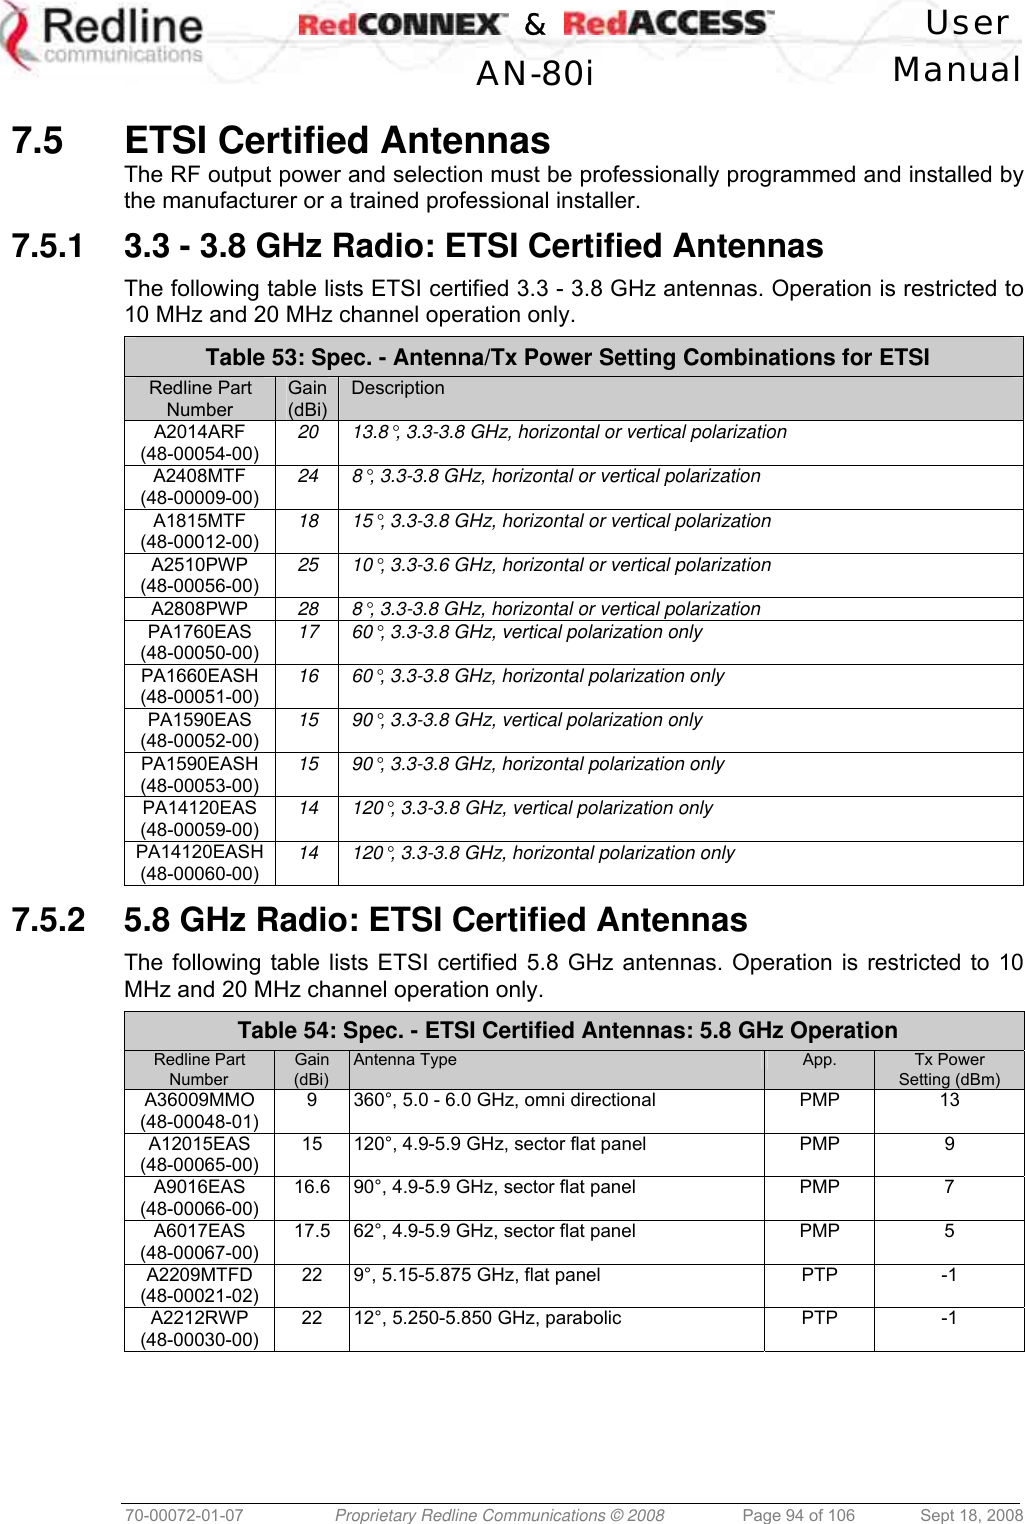    &amp;  User  AN-80i Manual  70-00072-01-07  Proprietary Redline Communications © 2008  Page 94 of 106  Sept 18, 2008  7.5  ETSI Certified Antennas The RF output power and selection must be professionally programmed and installed by the manufacturer or a trained professional installer. 7.5.1  3.3 - 3.8 GHz Radio: ETSI Certified Antennas  The following table lists ETSI certified 3.3 - 3.8 GHz antennas. Operation is restricted to 10 MHz and 20 MHz channel operation only. Table 53: Spec. - Antenna/Tx Power Setting Combinations for ETSI Redline Part Number Gain (dBi) Description A2014ARF (48-00054-00) 20  13.8°, 3.3-3.8 GHz, horizontal or vertical polarization A2408MTF (48-00009-00) 24  8°, 3.3-3.8 GHz, horizontal or vertical polarization A1815MTF (48-00012-00) 18  15°, 3.3-3.8 GHz, horizontal or vertical polarization A2510PWP (48-00056-00) 25  10°, 3.3-3.6 GHz, horizontal or vertical polarization A2808PWP  28  8°, 3.3-3.8 GHz, horizontal or vertical polarization PA1760EAS (48-00050-00) 17  60°, 3.3-3.8 GHz, vertical polarization only PA1660EASH (48-00051-00) 16  60°, 3.3-3.8 GHz, horizontal polarization only PA1590EAS (48-00052-00) 15  90°, 3.3-3.8 GHz, vertical polarization only PA1590EASH (48-00053-00) 15  90°, 3.3-3.8 GHz, horizontal polarization only PA14120EAS (48-00059-00) 14  120°, 3.3-3.8 GHz, vertical polarization only PA14120EASH (48-00060-00) 14  120°, 3.3-3.8 GHz, horizontal polarization only  7.5.2  5.8 GHz Radio: ETSI Certified Antennas  The following table lists ETSI certified 5.8 GHz antennas. Operation is restricted to 10 MHz and 20 MHz channel operation only. Table 54: Spec. - ETSI Certified Antennas: 5.8 GHz Operation Redline Part Number Gain (dBi) Antenna Type  App.  Tx Power Setting (dBm) A36009MMO  (48-00048-01) 9  360°, 5.0 - 6.0 GHz, omni directional  PMP  13 A12015EAS  (48-00065-00) 15  120°, 4.9-5.9 GHz, sector flat panel  PMP  9 A9016EAS (48-00066-00) 16.6  90°, 4.9-5.9 GHz, sector flat panel  PMP  7 A6017EAS (48-00067-00) 17.5  62°, 4.9-5.9 GHz, sector flat panel  PMP  5 A2209MTFD (48-00021-02) 22  9°, 5.15-5.875 GHz, flat panel  PTP  -1 A2212RWP  (48-00030-00) 22  12°, 5.250-5.850 GHz, parabolic  PTP  -1  